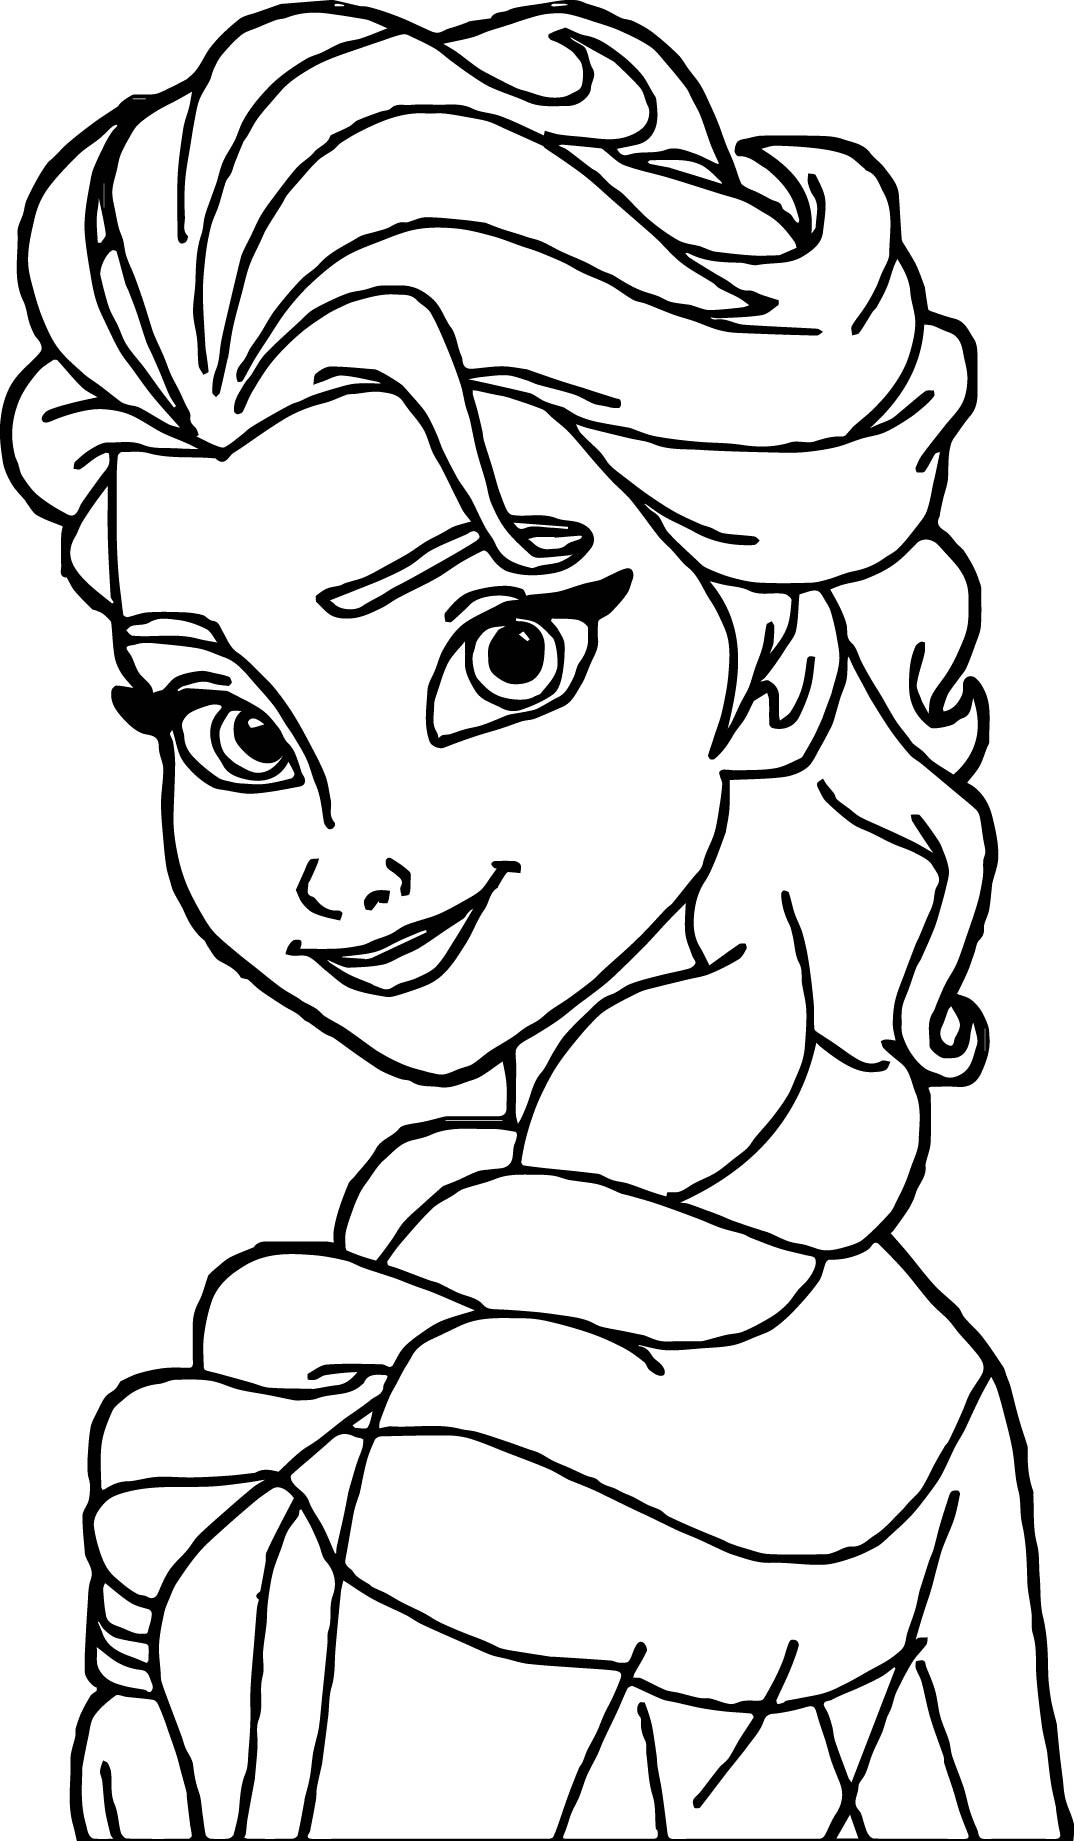 Coloring Pages For Kids Elsa
 Elsa Face Coloring Page